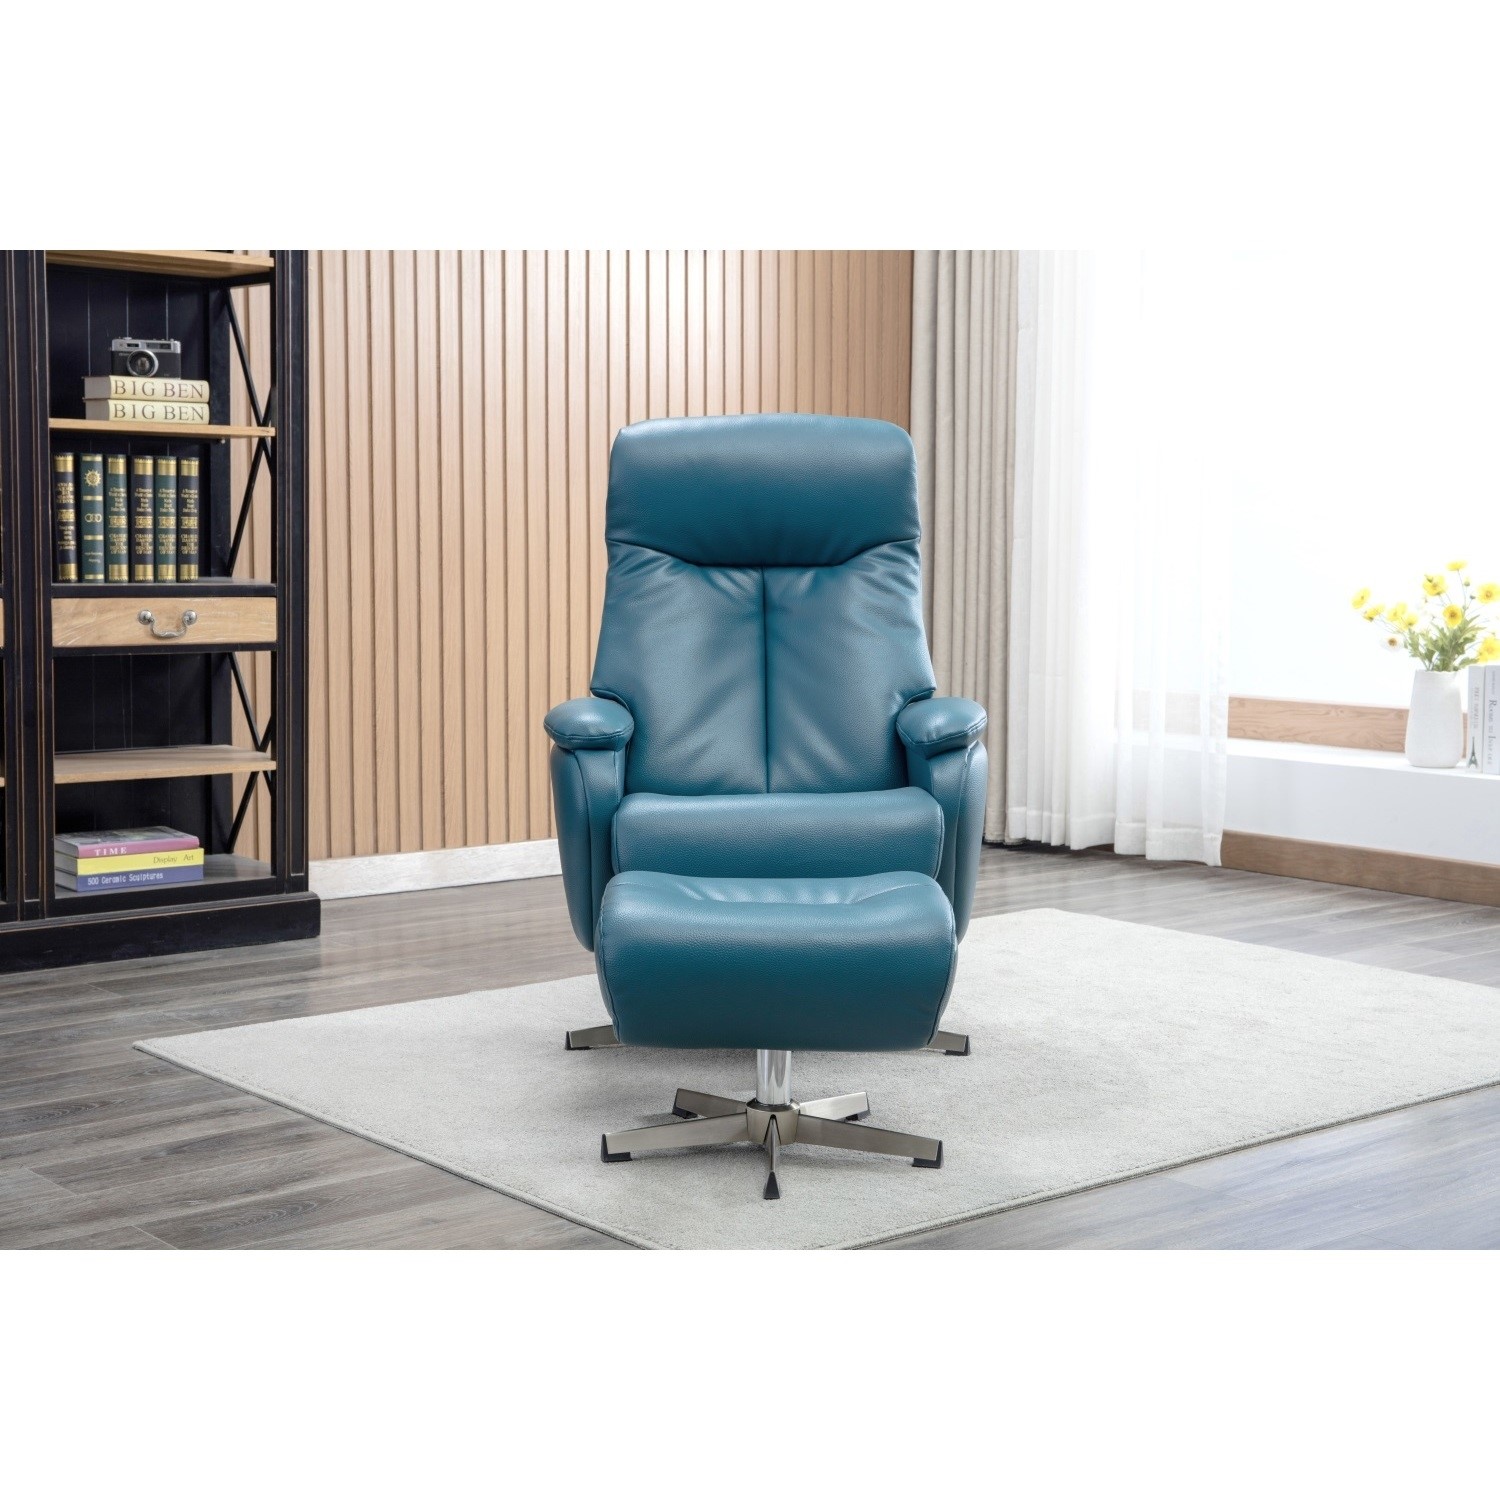 Recliner Faux Leather Chair, Blue Faux Leather Armchair